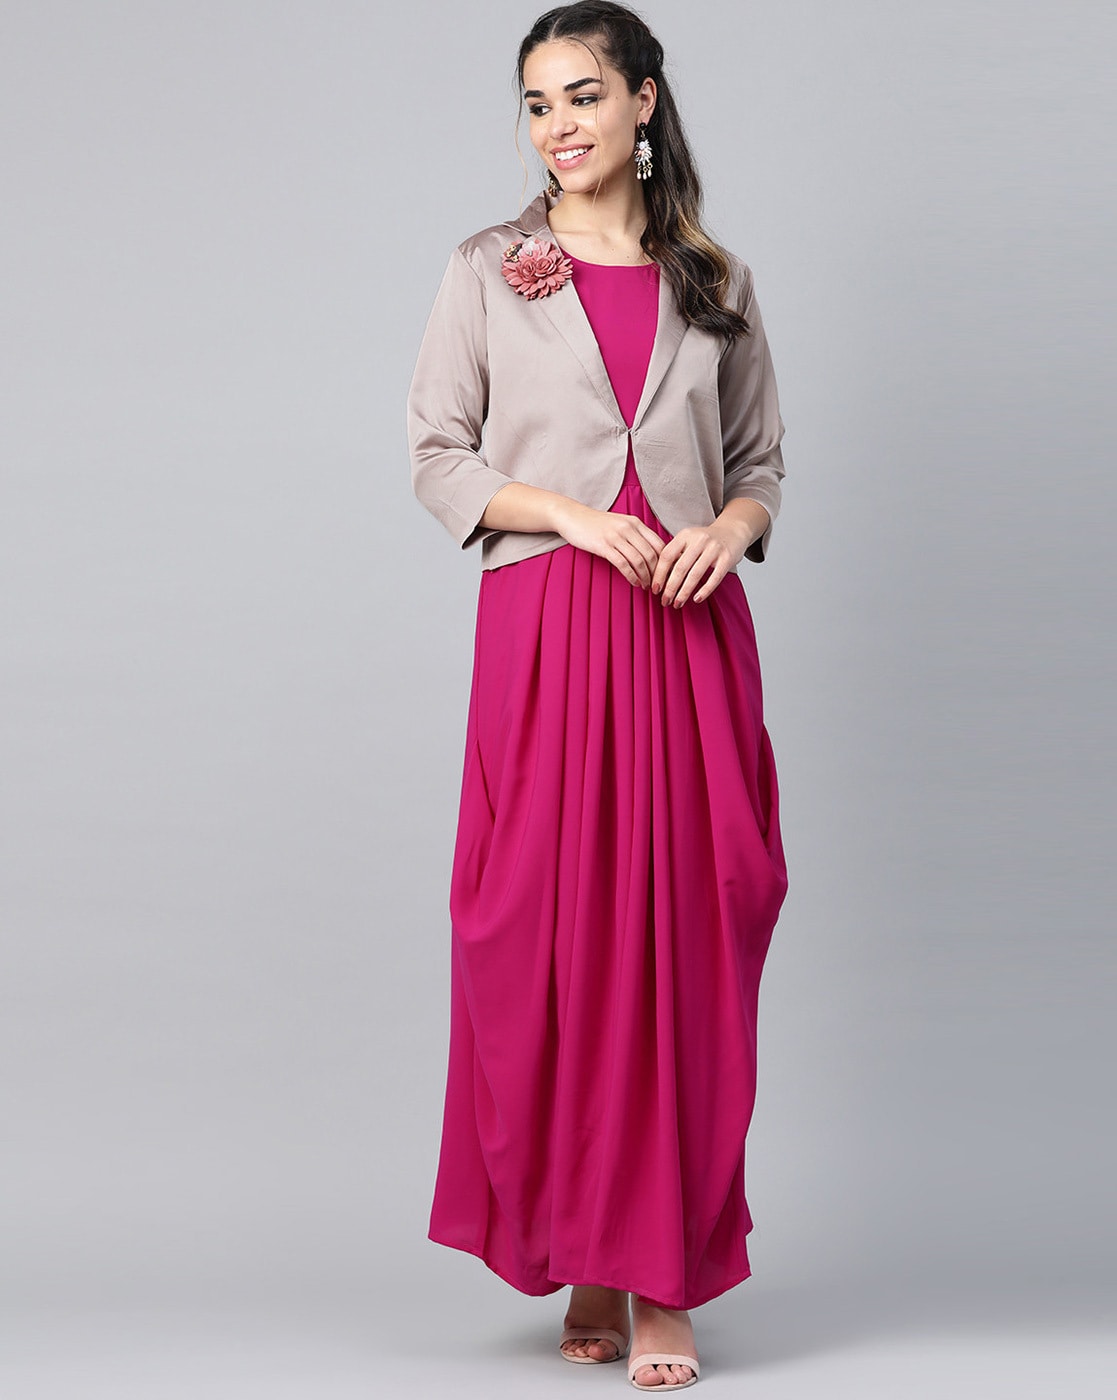 Girls Daily Wear Dresses at Rs 395 | Pune | ID: 23327808830